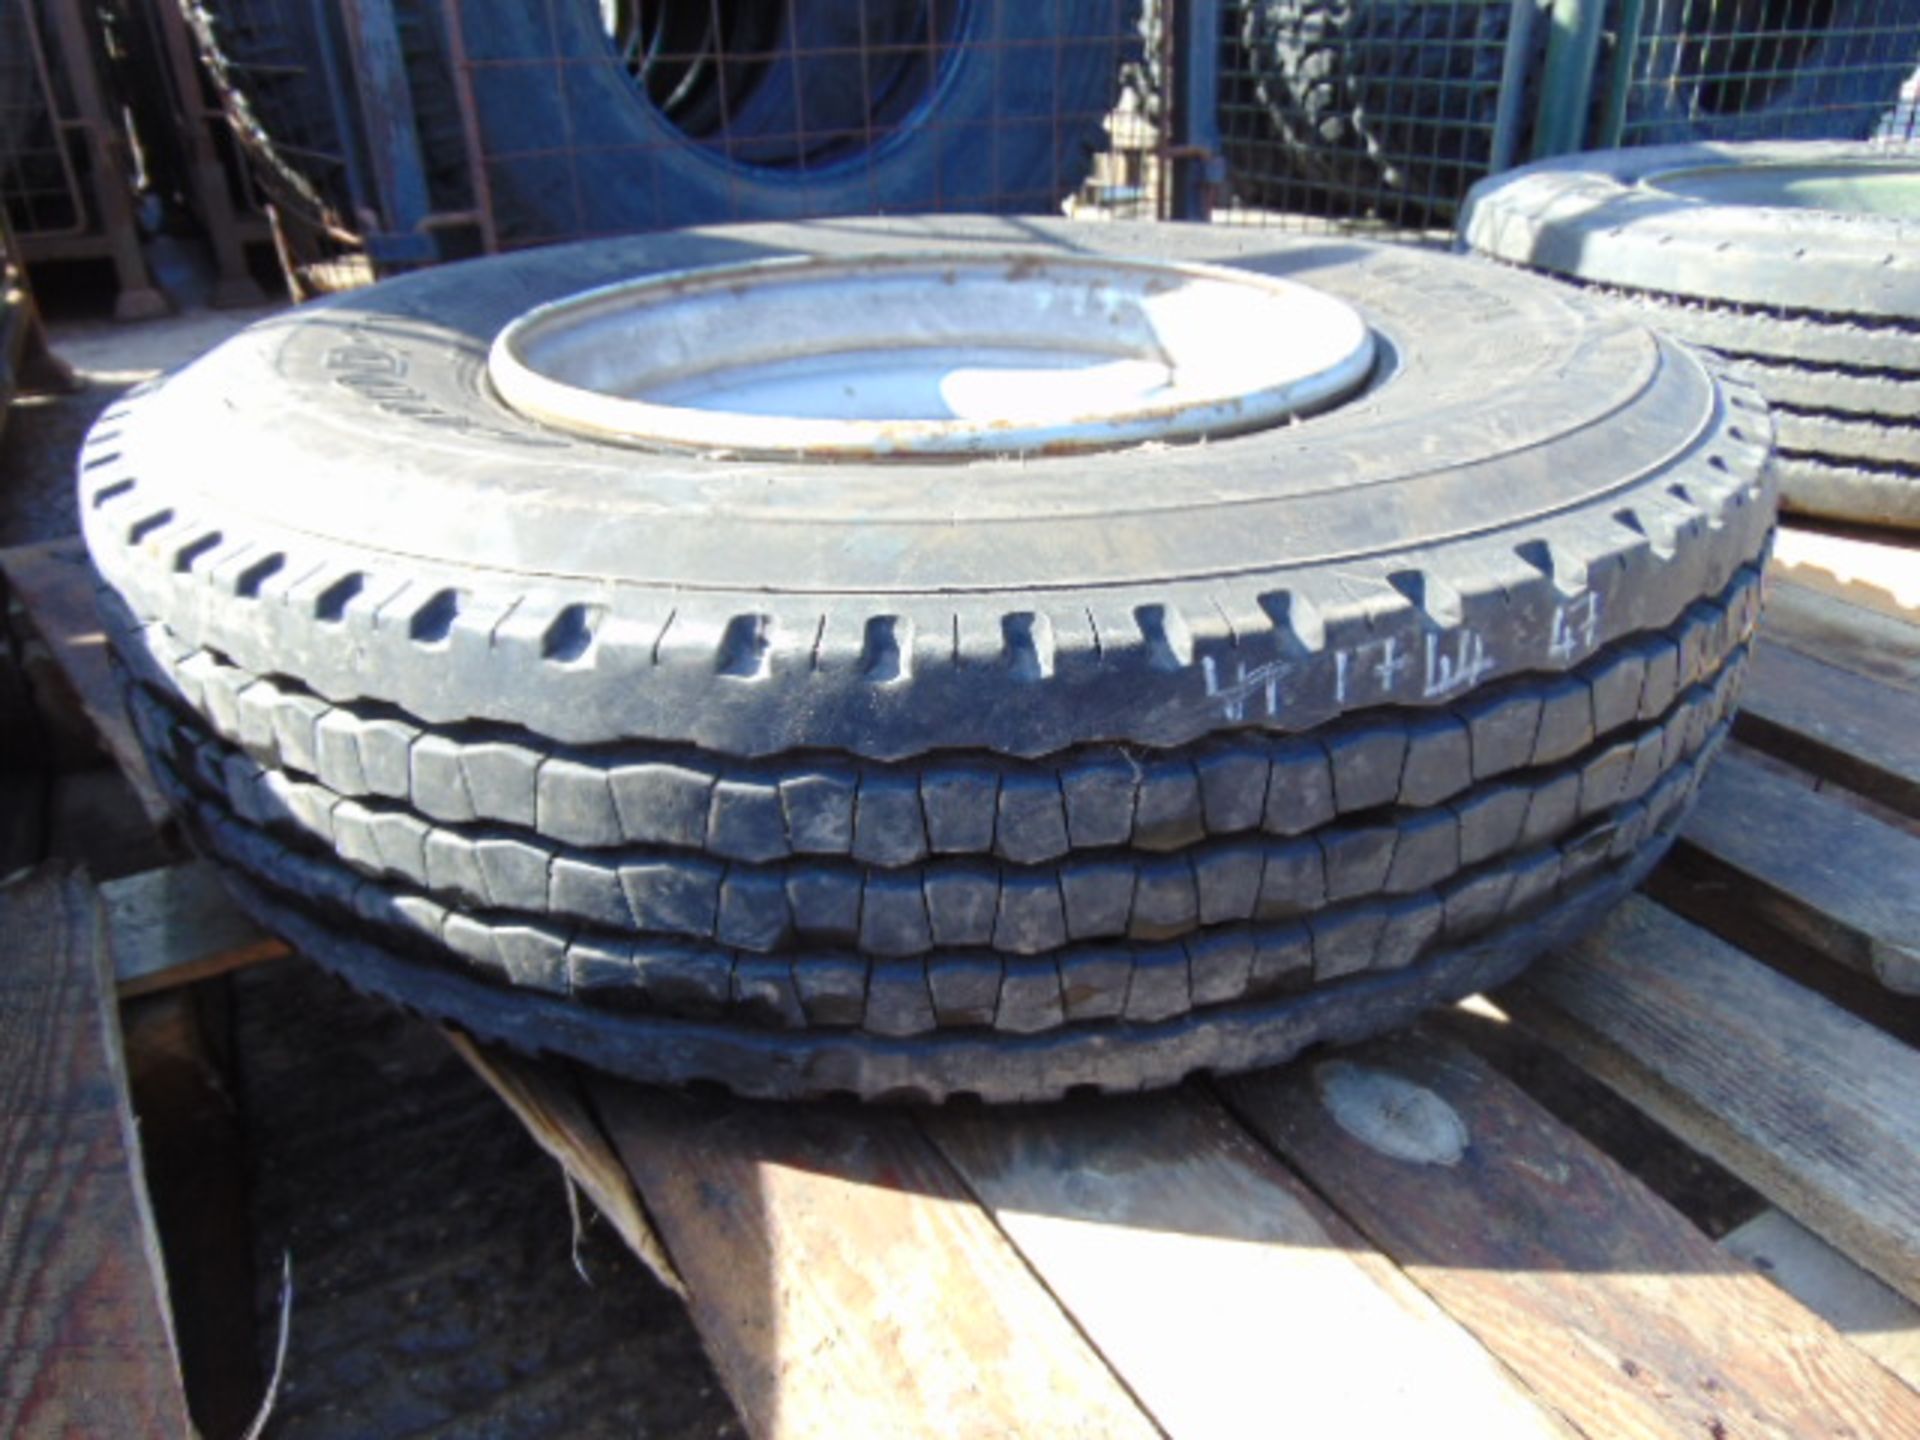 1 x Goodyear G291 10R 17.5 Tyre complete with 6 stud rim - Image 2 of 7